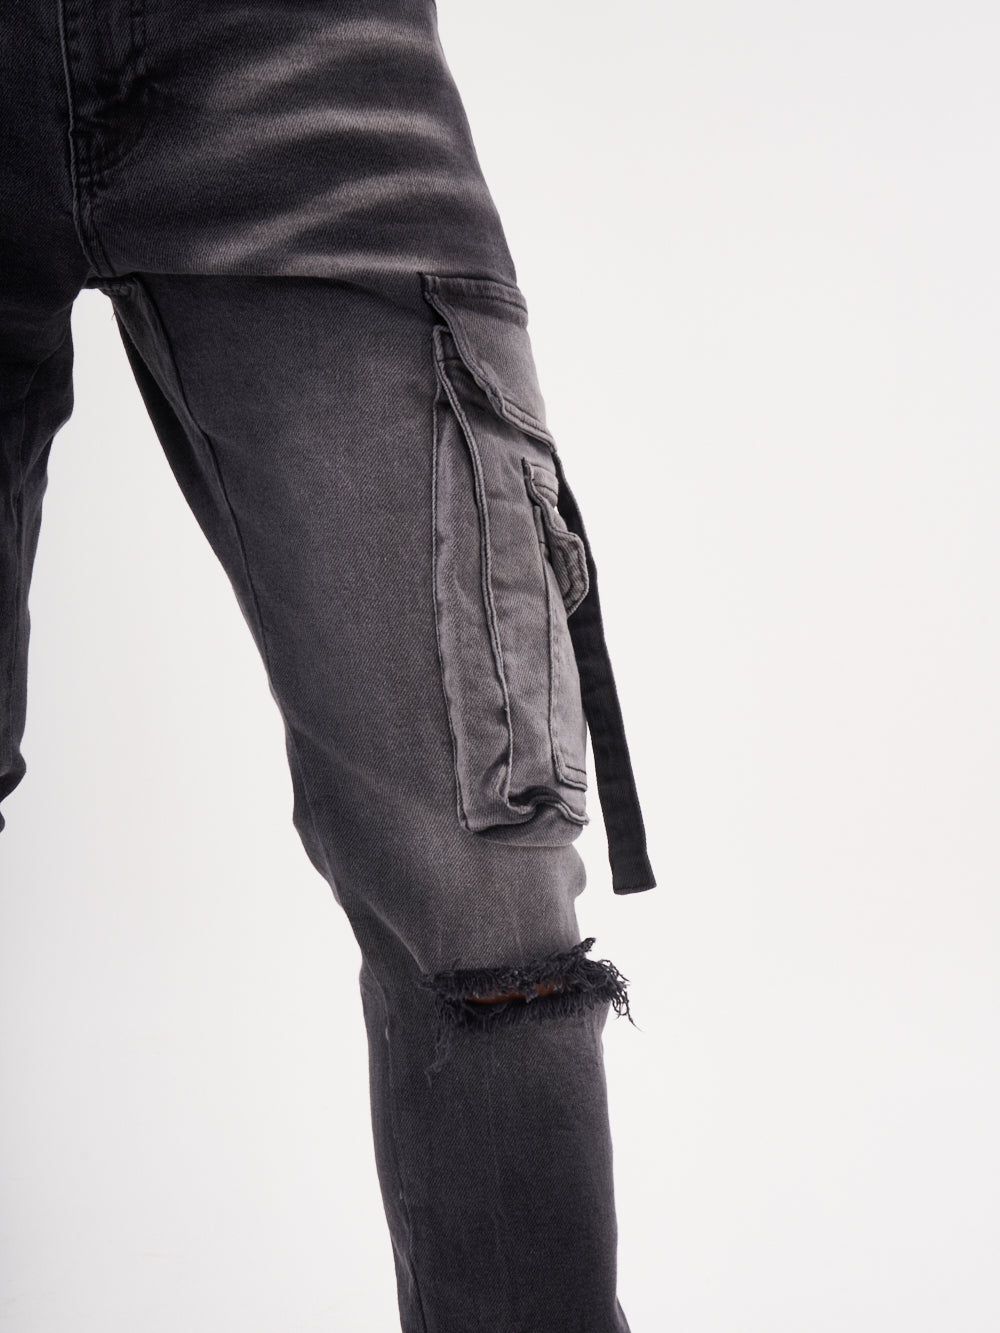 A man wearing HIPSTER cargo pants with ripped knees.